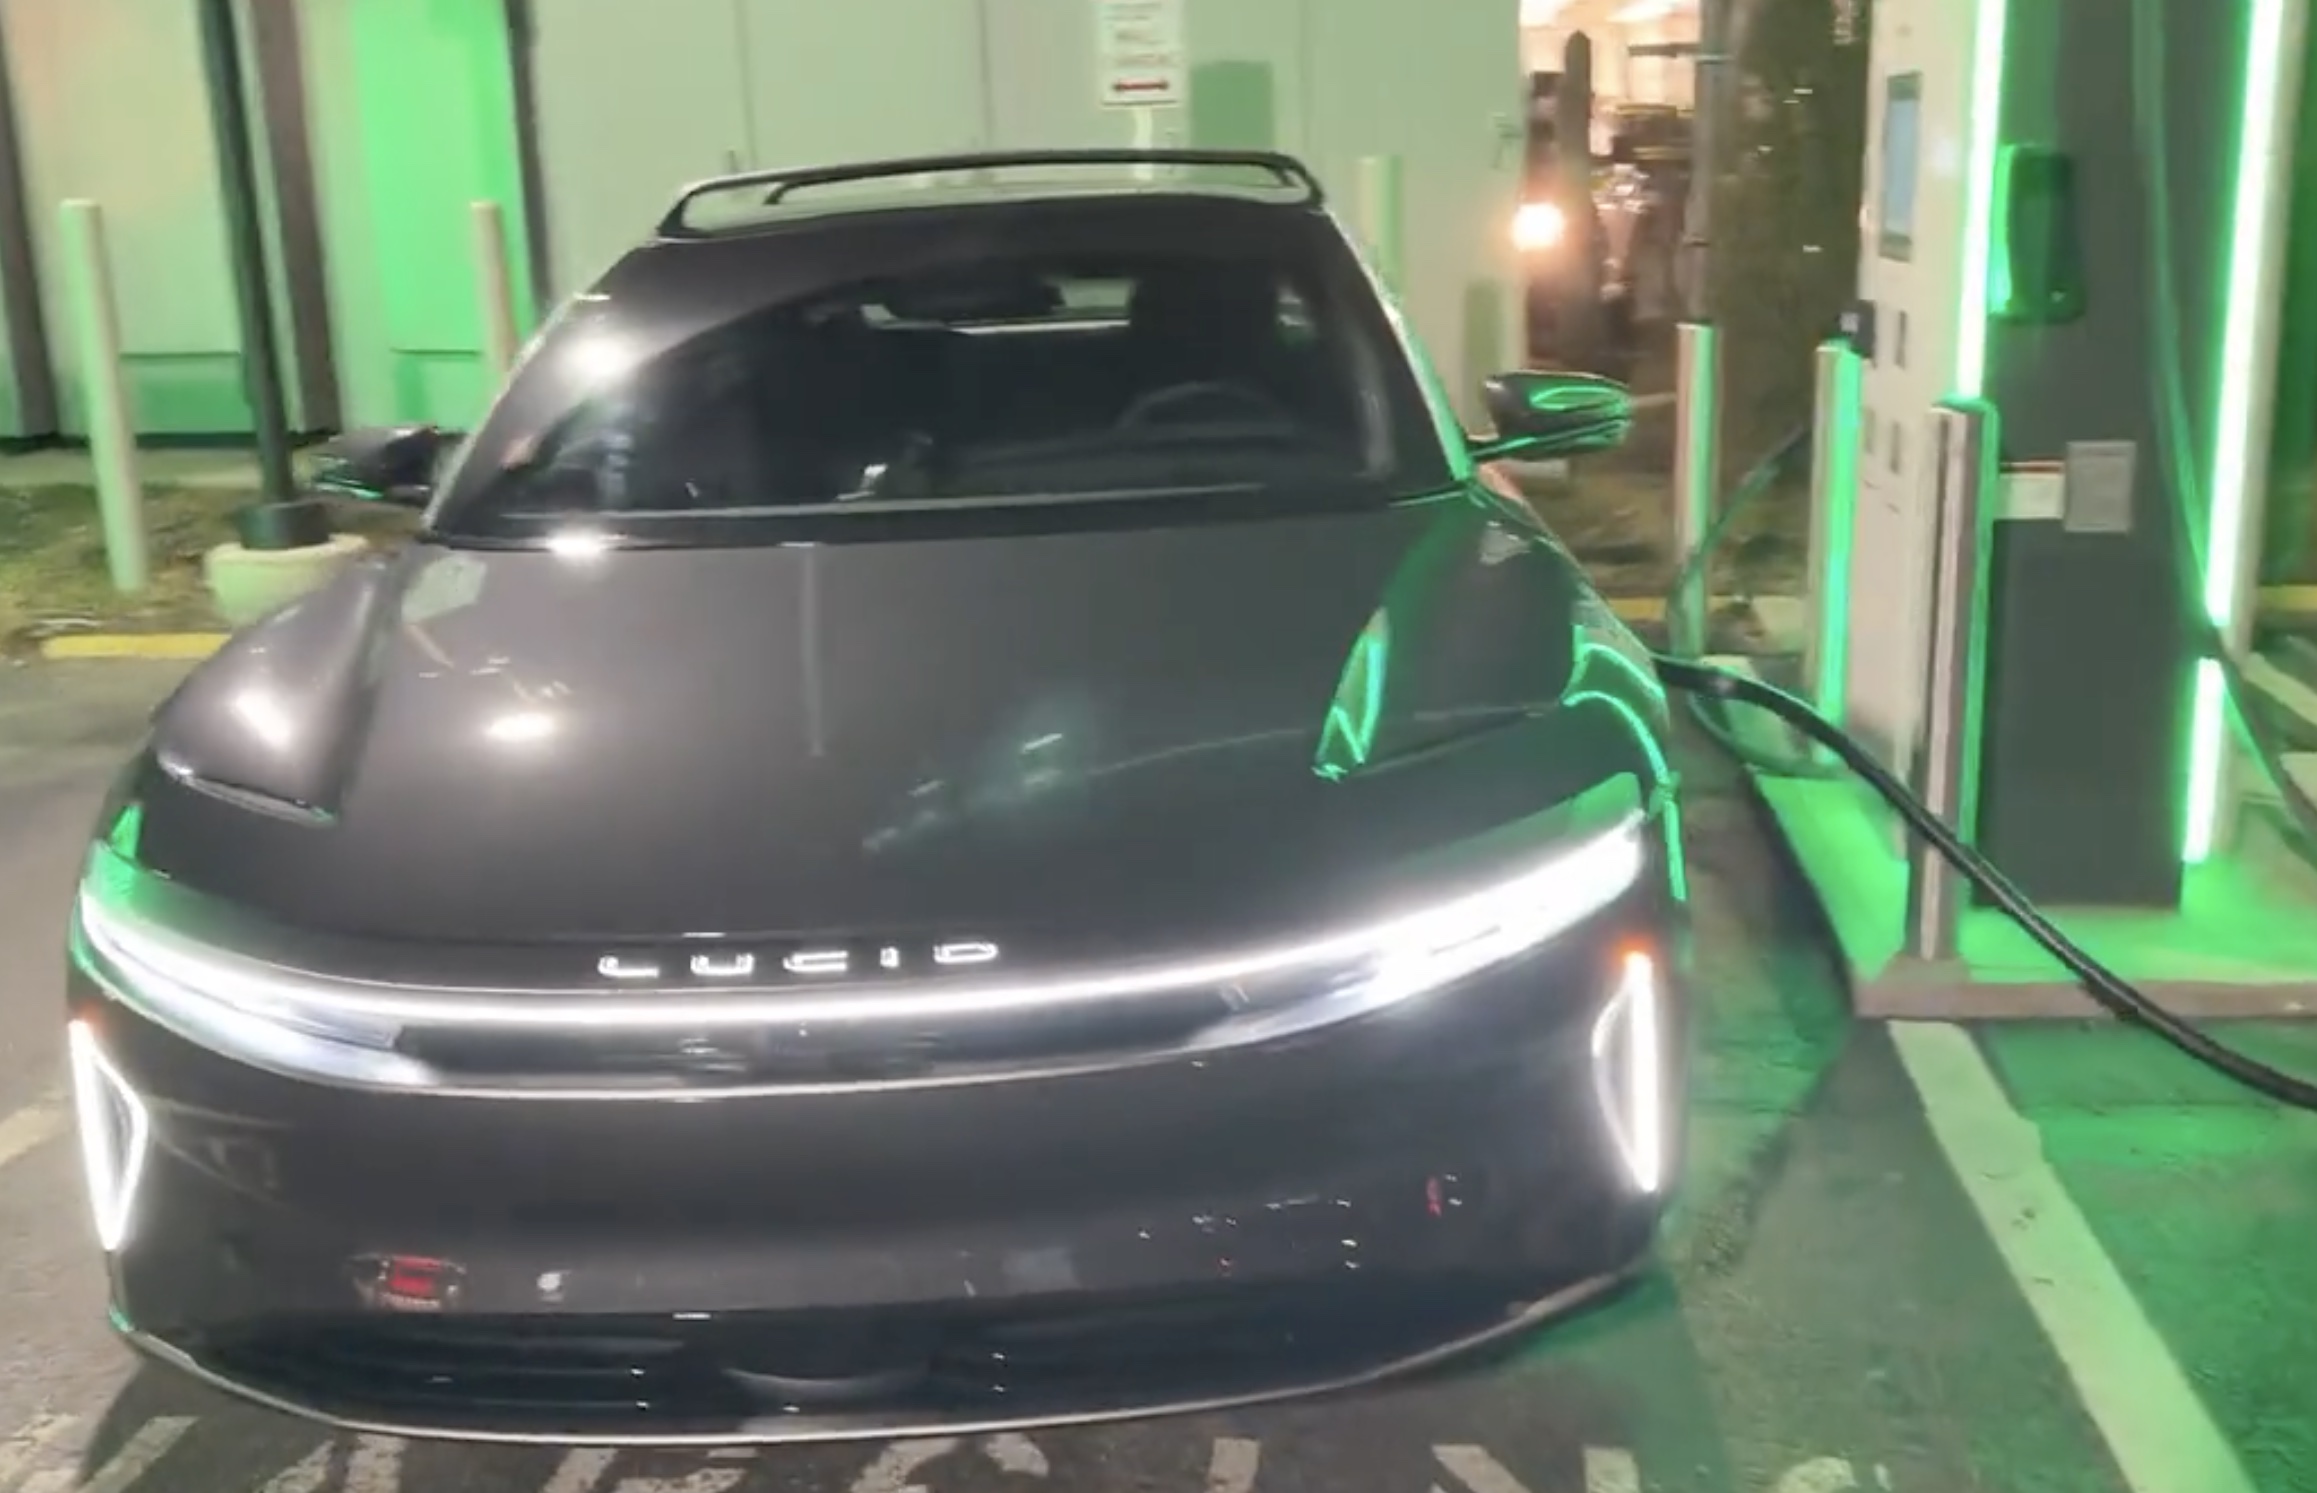 Electrify America’s areas for improvement highlighted by Lucid Air owner’s experience